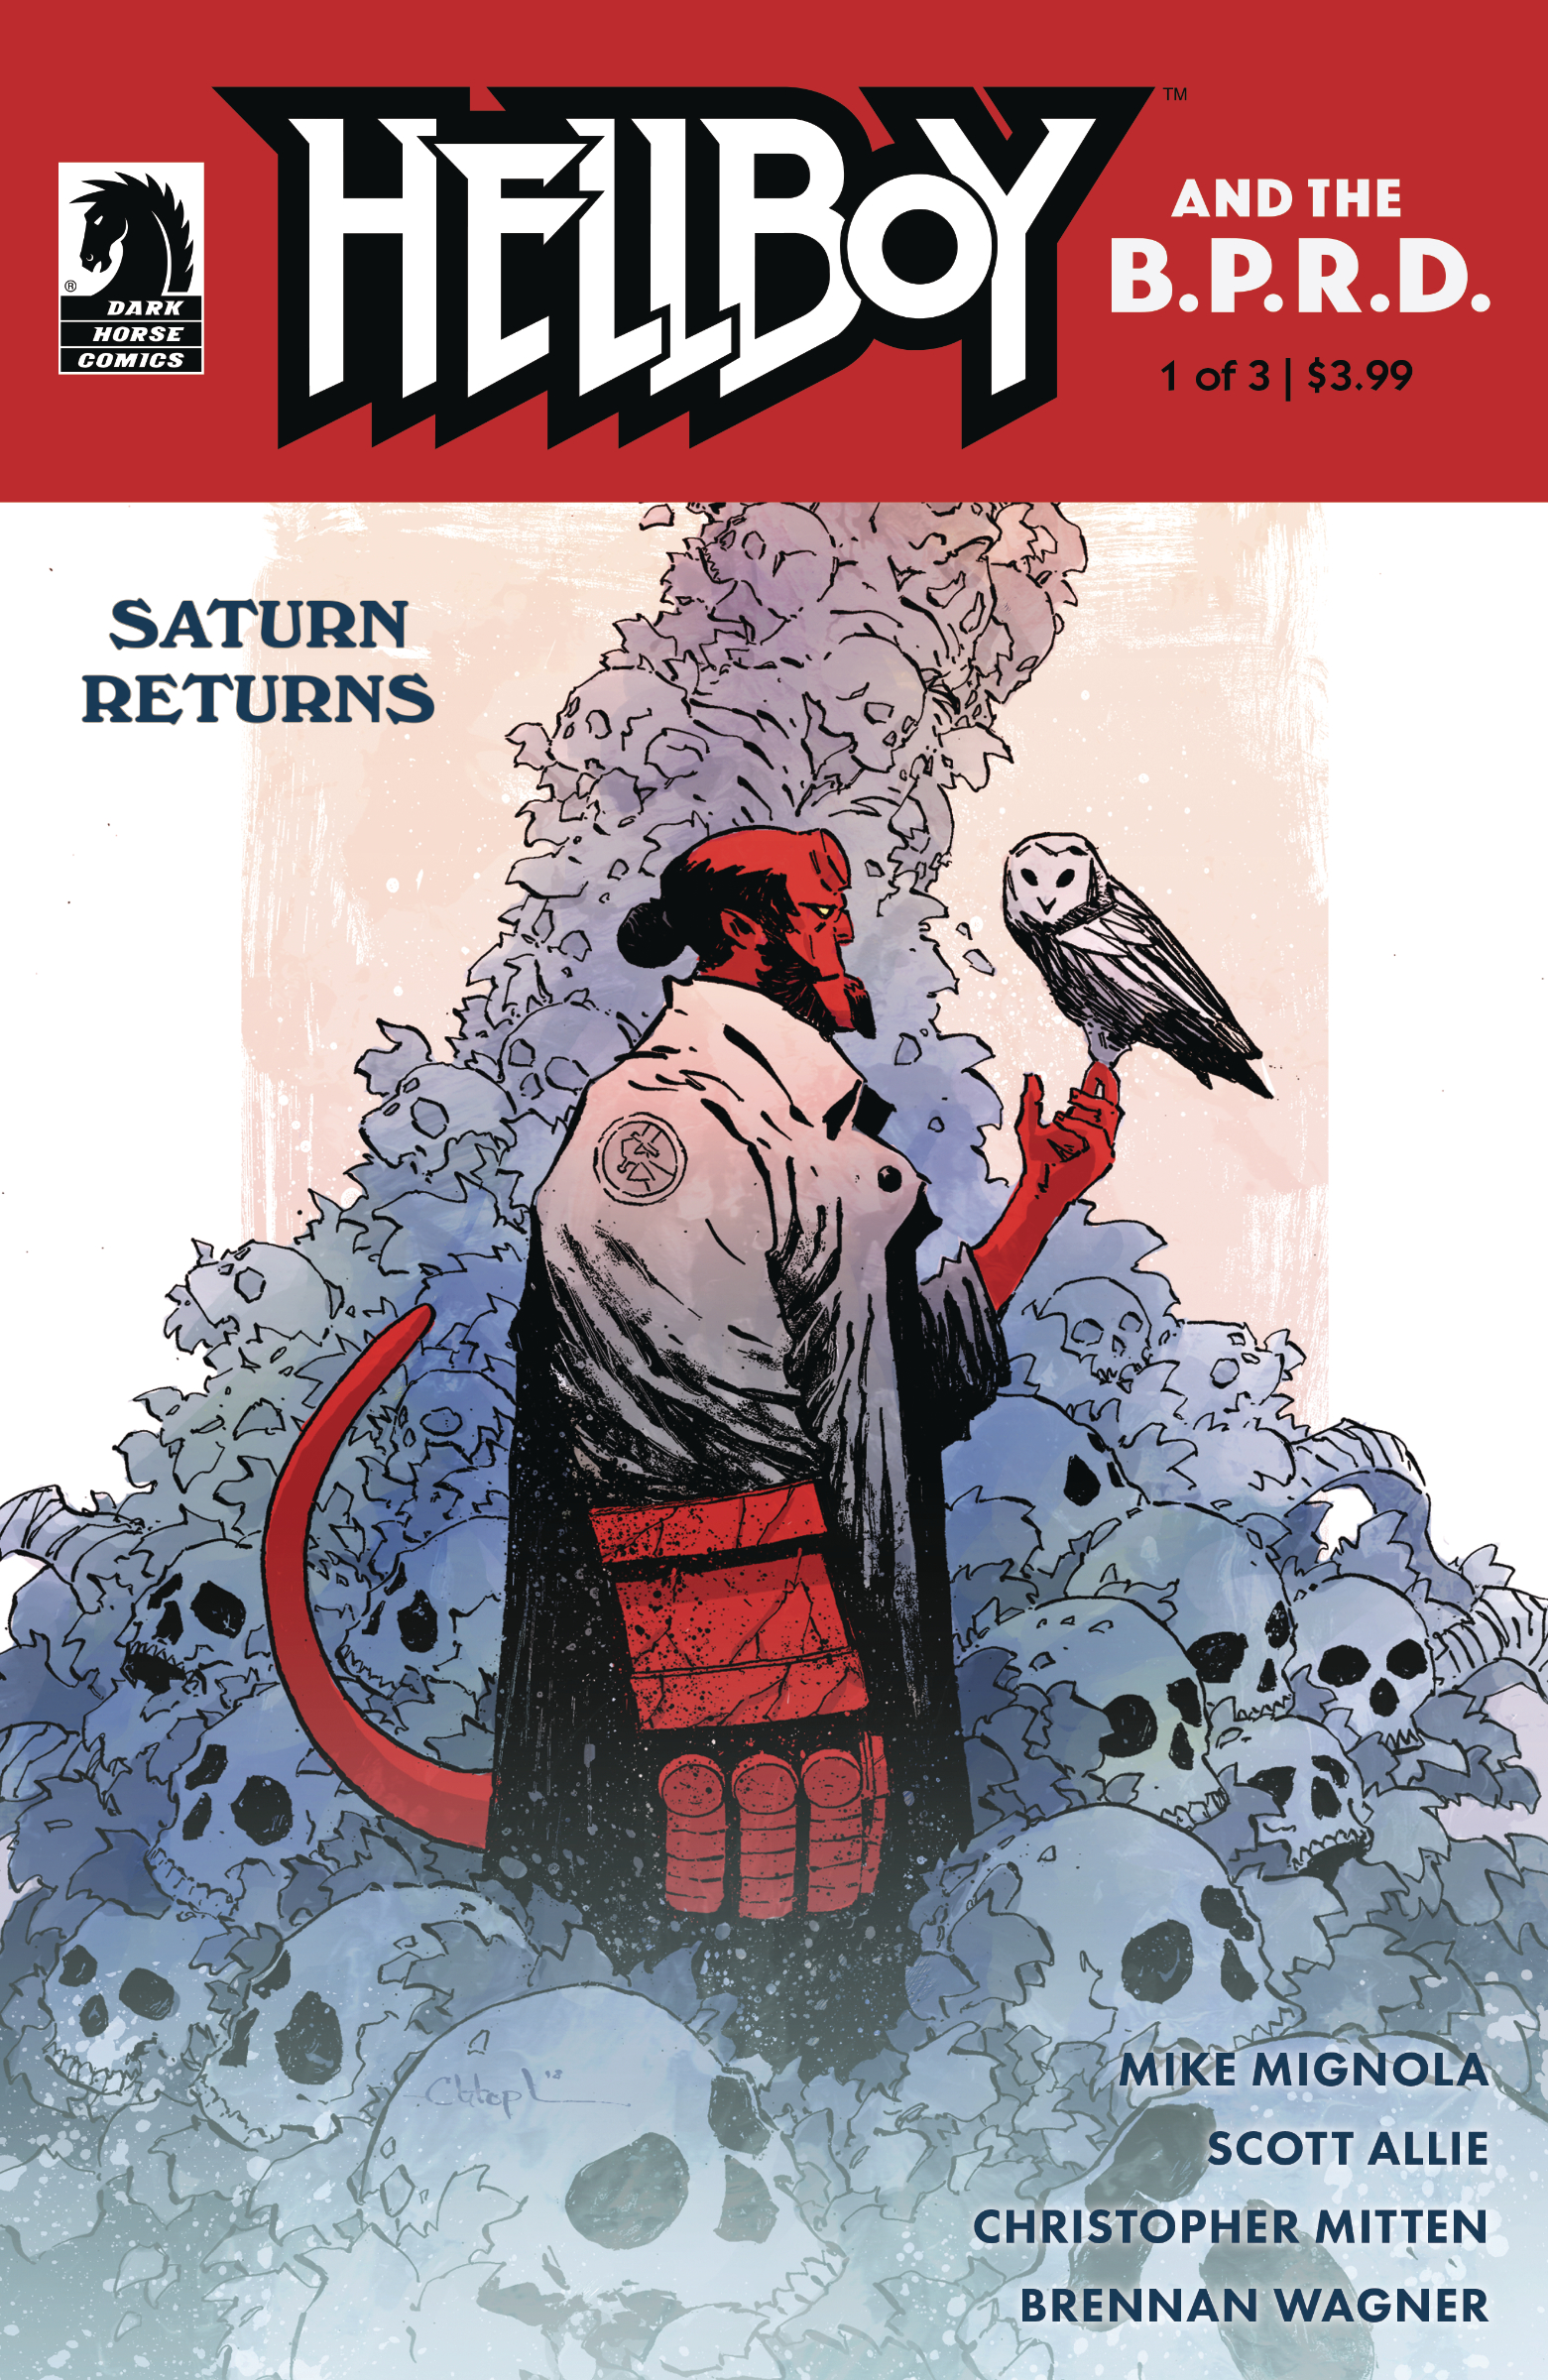 Hellboy and the BPRD: Saturn Returns no. 1 (1 of 3) (2019 Series)